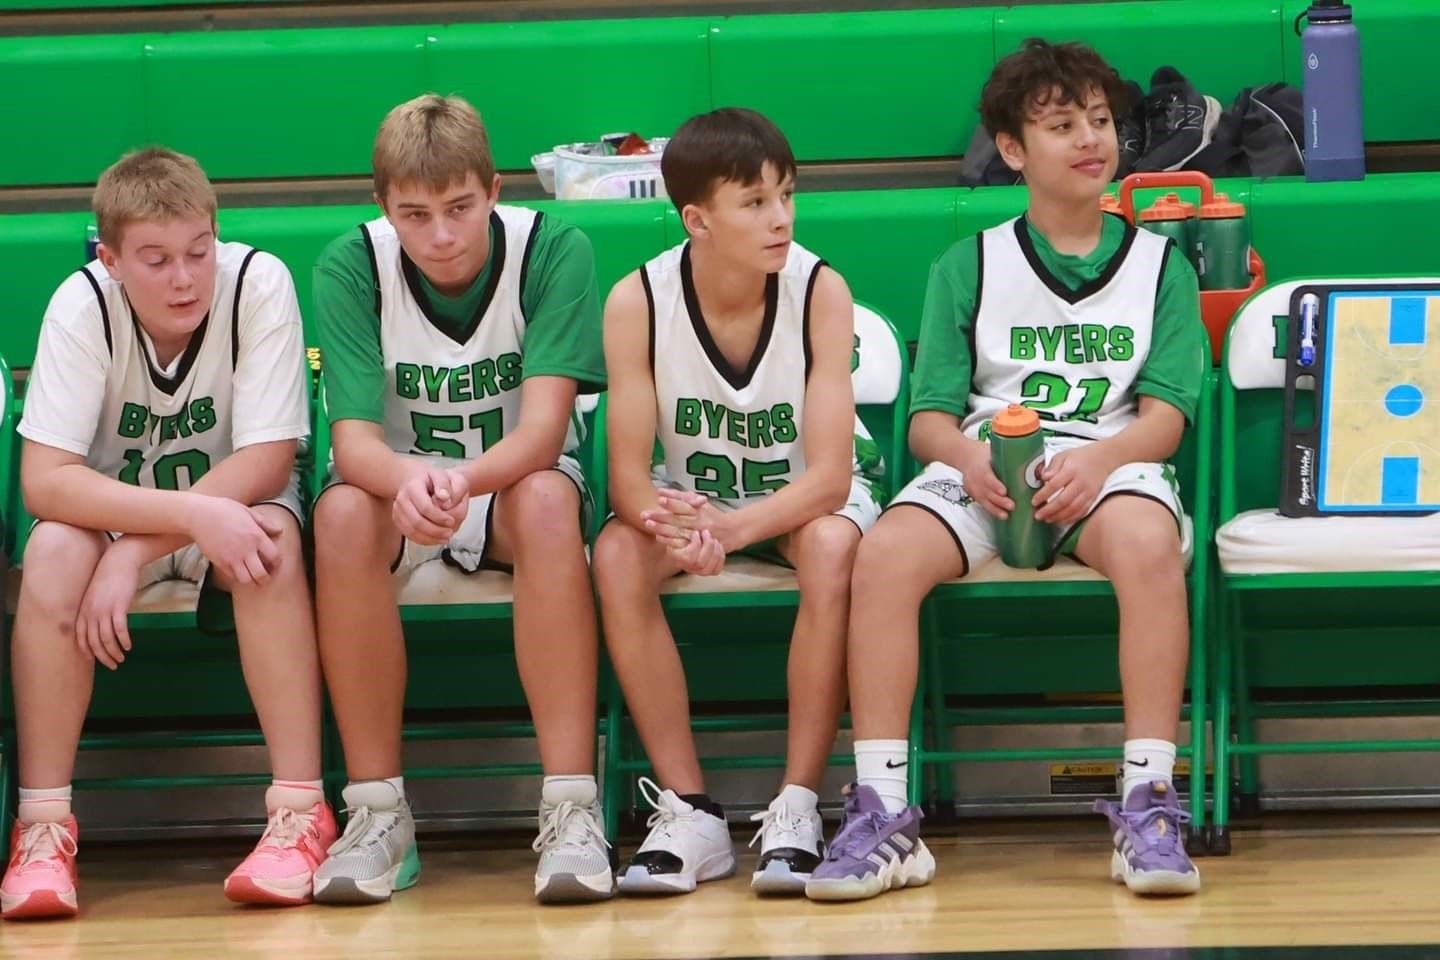 Byers team on the bench cheering on the boys on the court